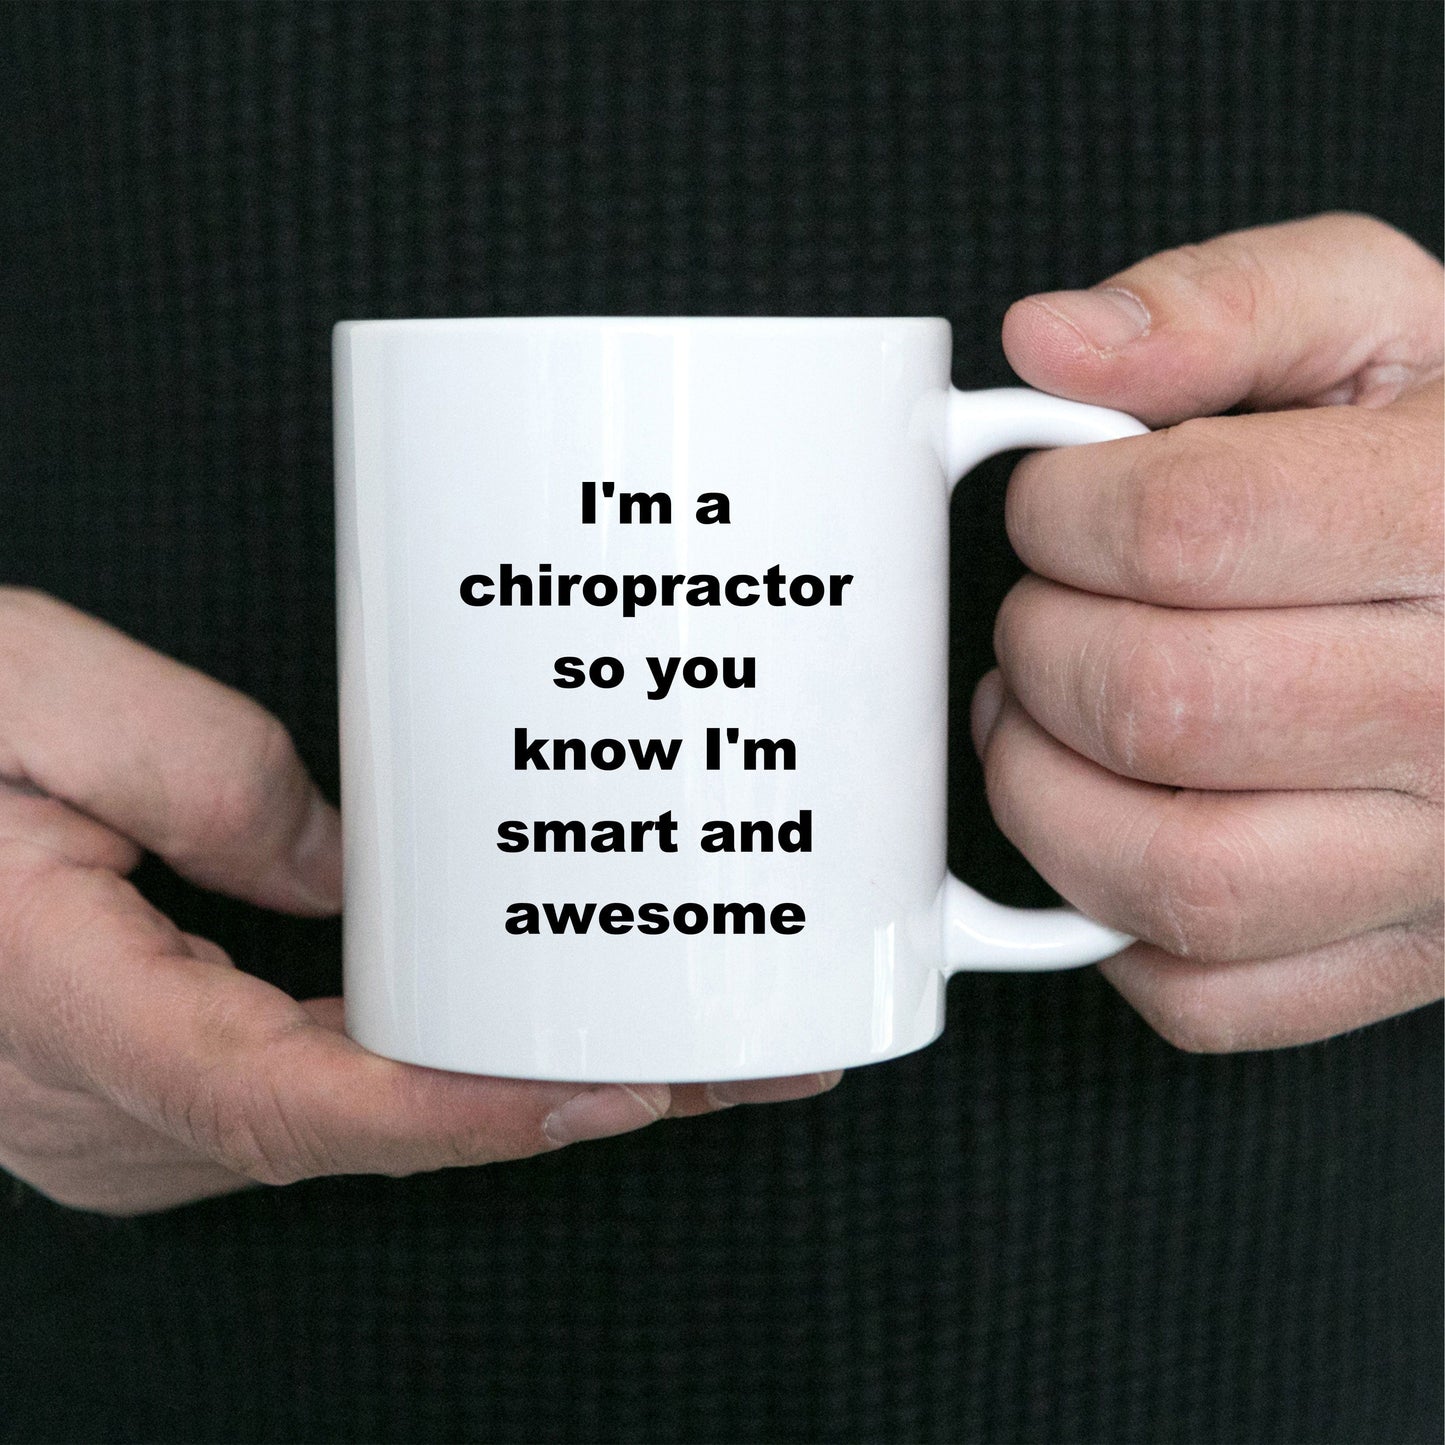 Chiropractor Custom Ceramic Coffee Mug - I'm a chiropractor so you know I'm smart and awesome